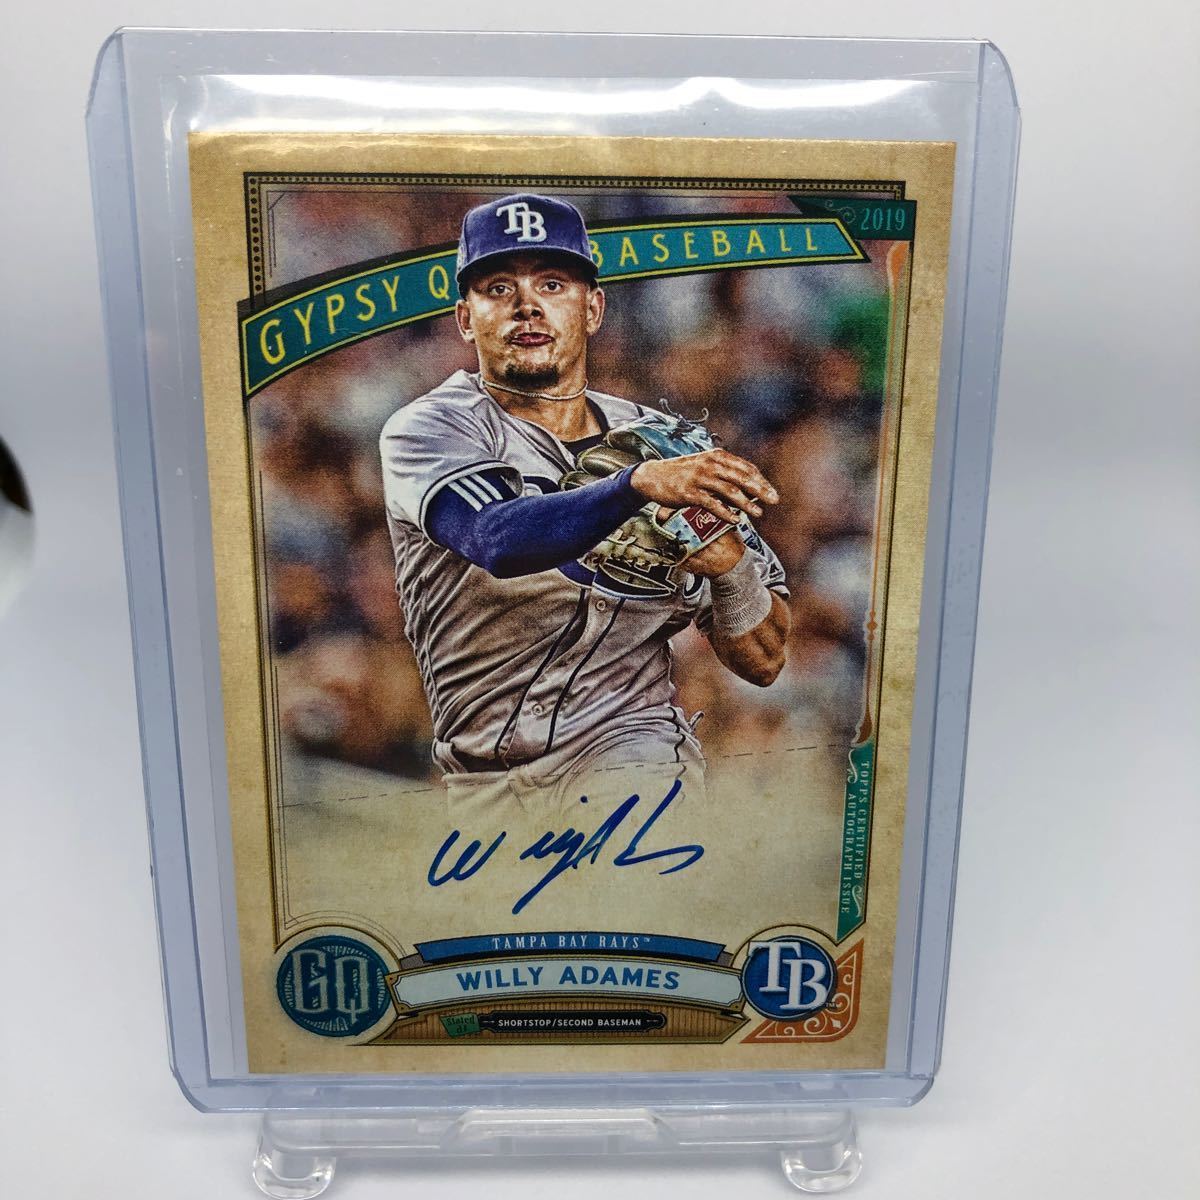 Topps 2019 Gypsy Queen Willy Adames Auto 現Milwaukee Brewers ウィリー・アダメス ミルウォーキー・ブリュワーズ 直筆サイン_画像1